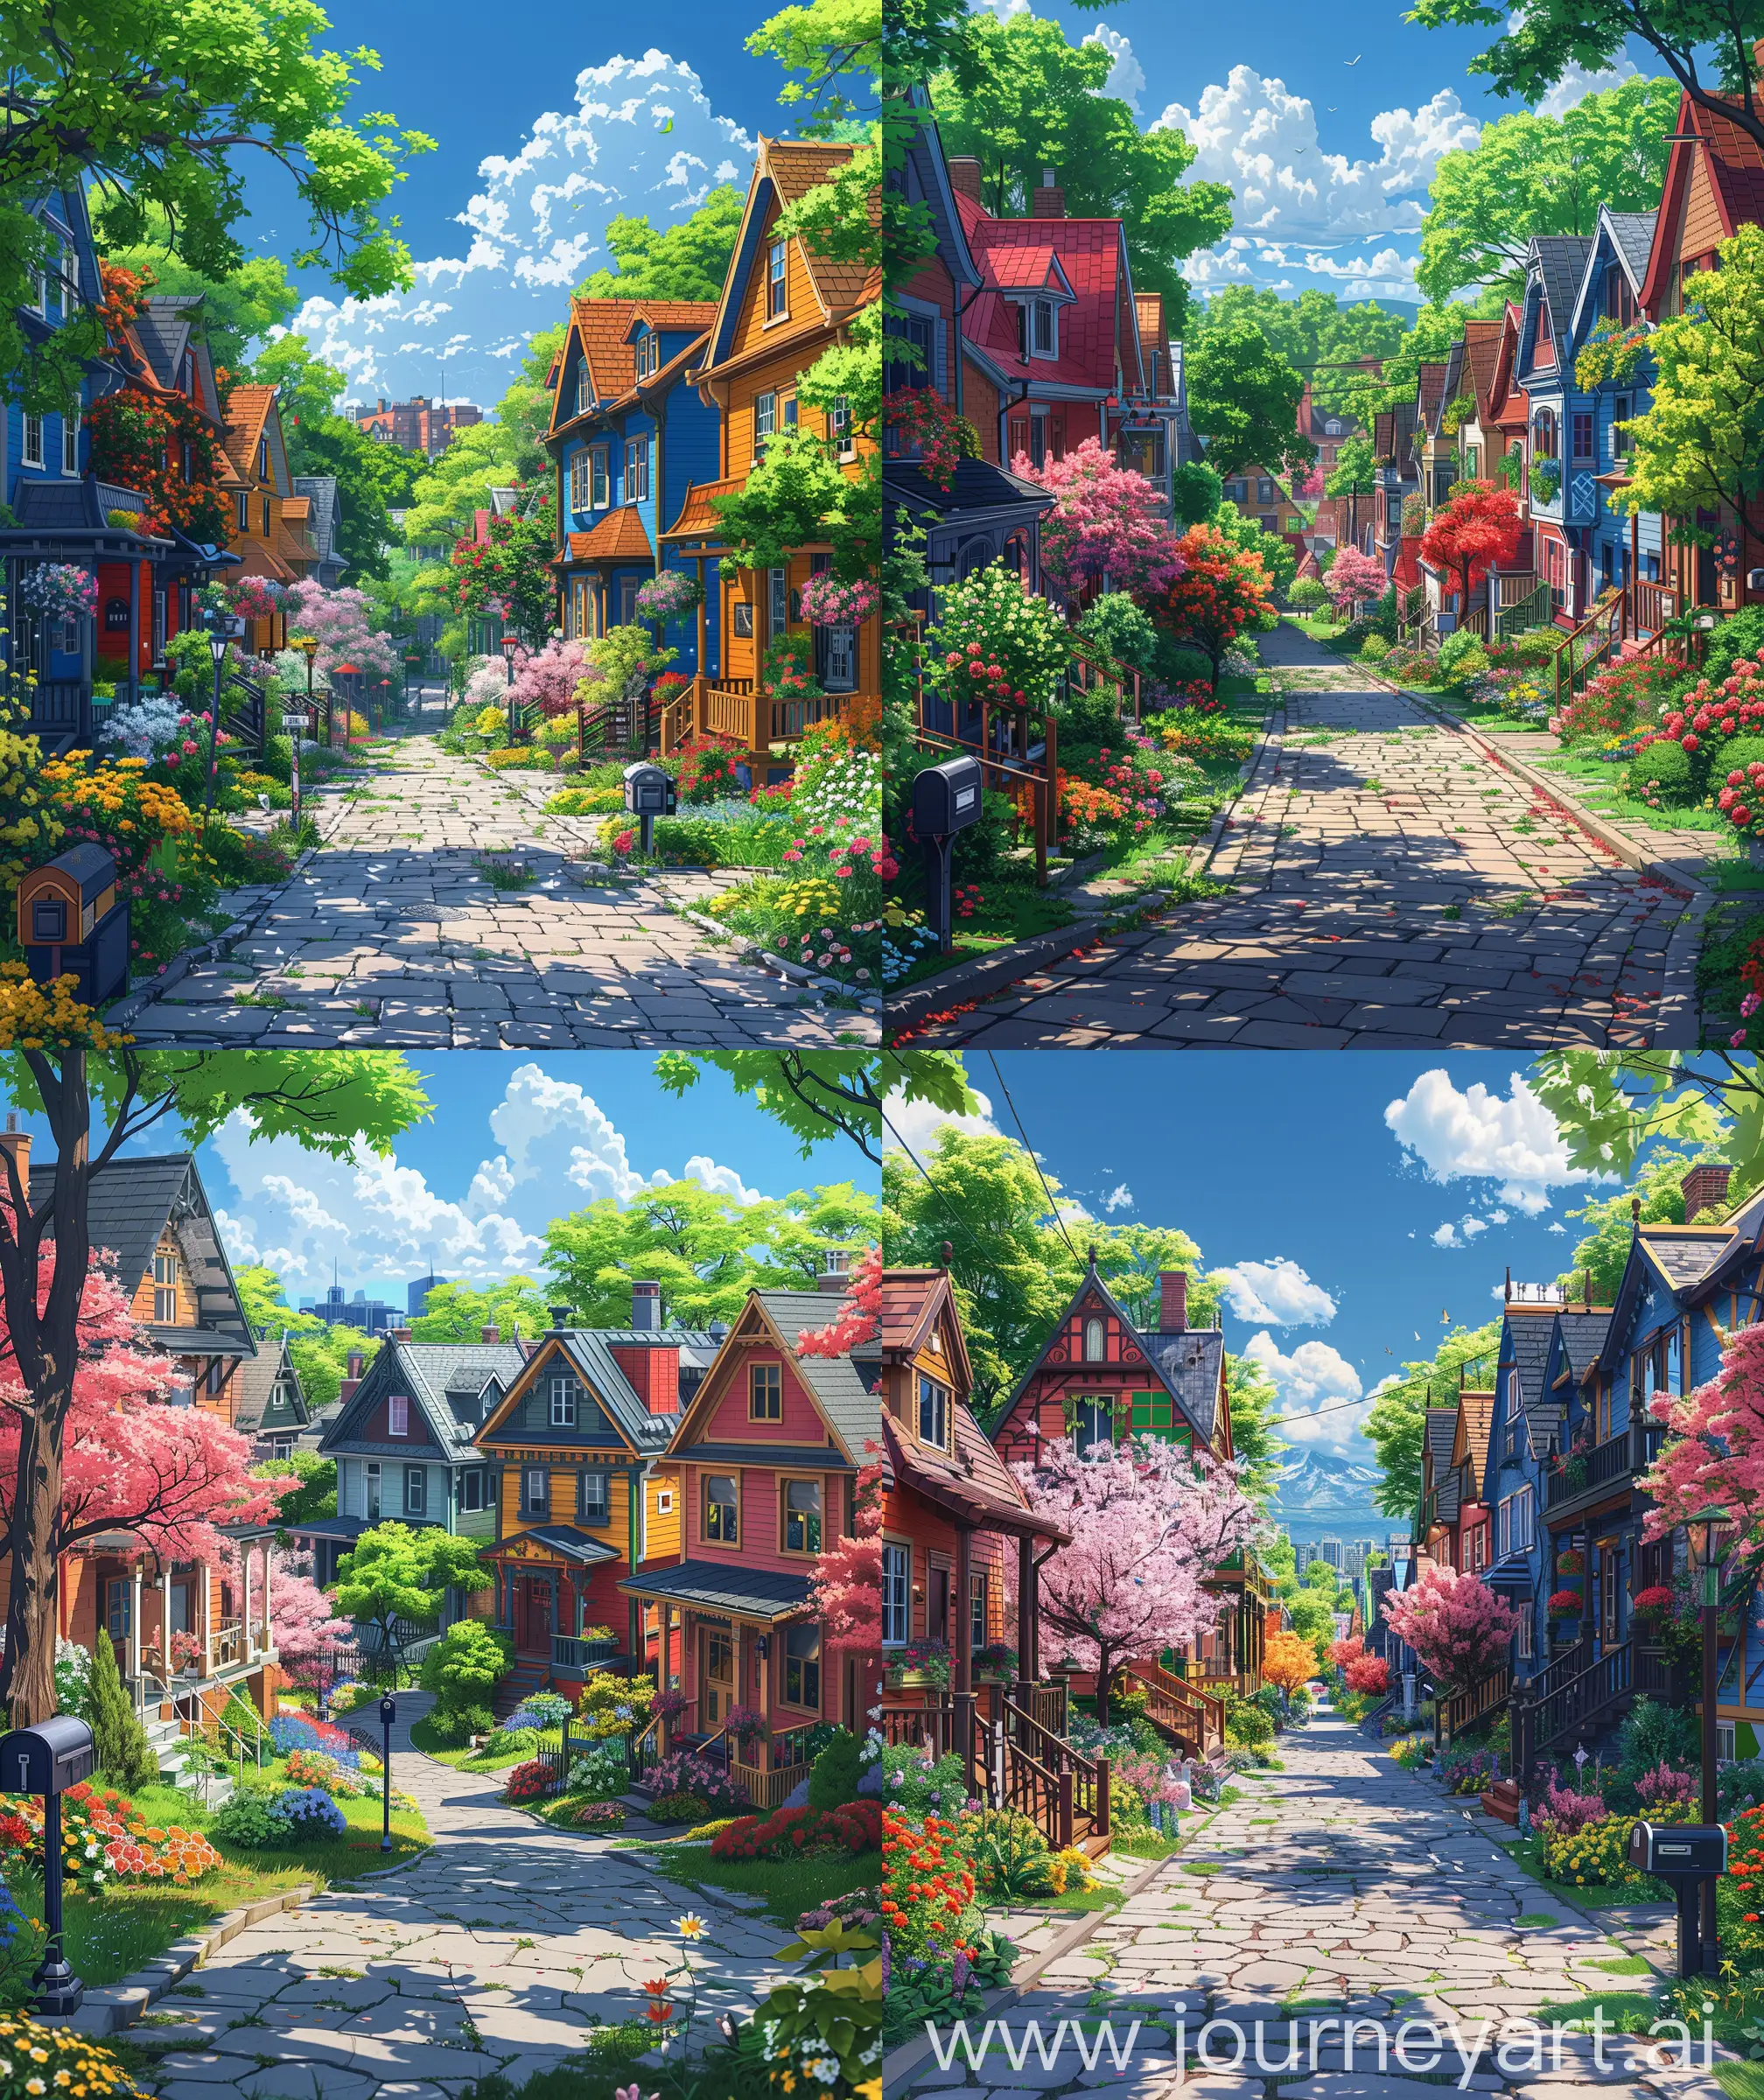 Anime scenary, illustration, direct front facade, anime style montreal suburban colorful houses across street, colorful flower brushes, flower tree around, mail box, stone pavement leading the houses, colorful and vibrant, day time, summer time view, breeze, illustration, anime scenary , ultra HD, high quality, sharp details, no blurry image, no hyperrealistic --ar 27:32 --s 600